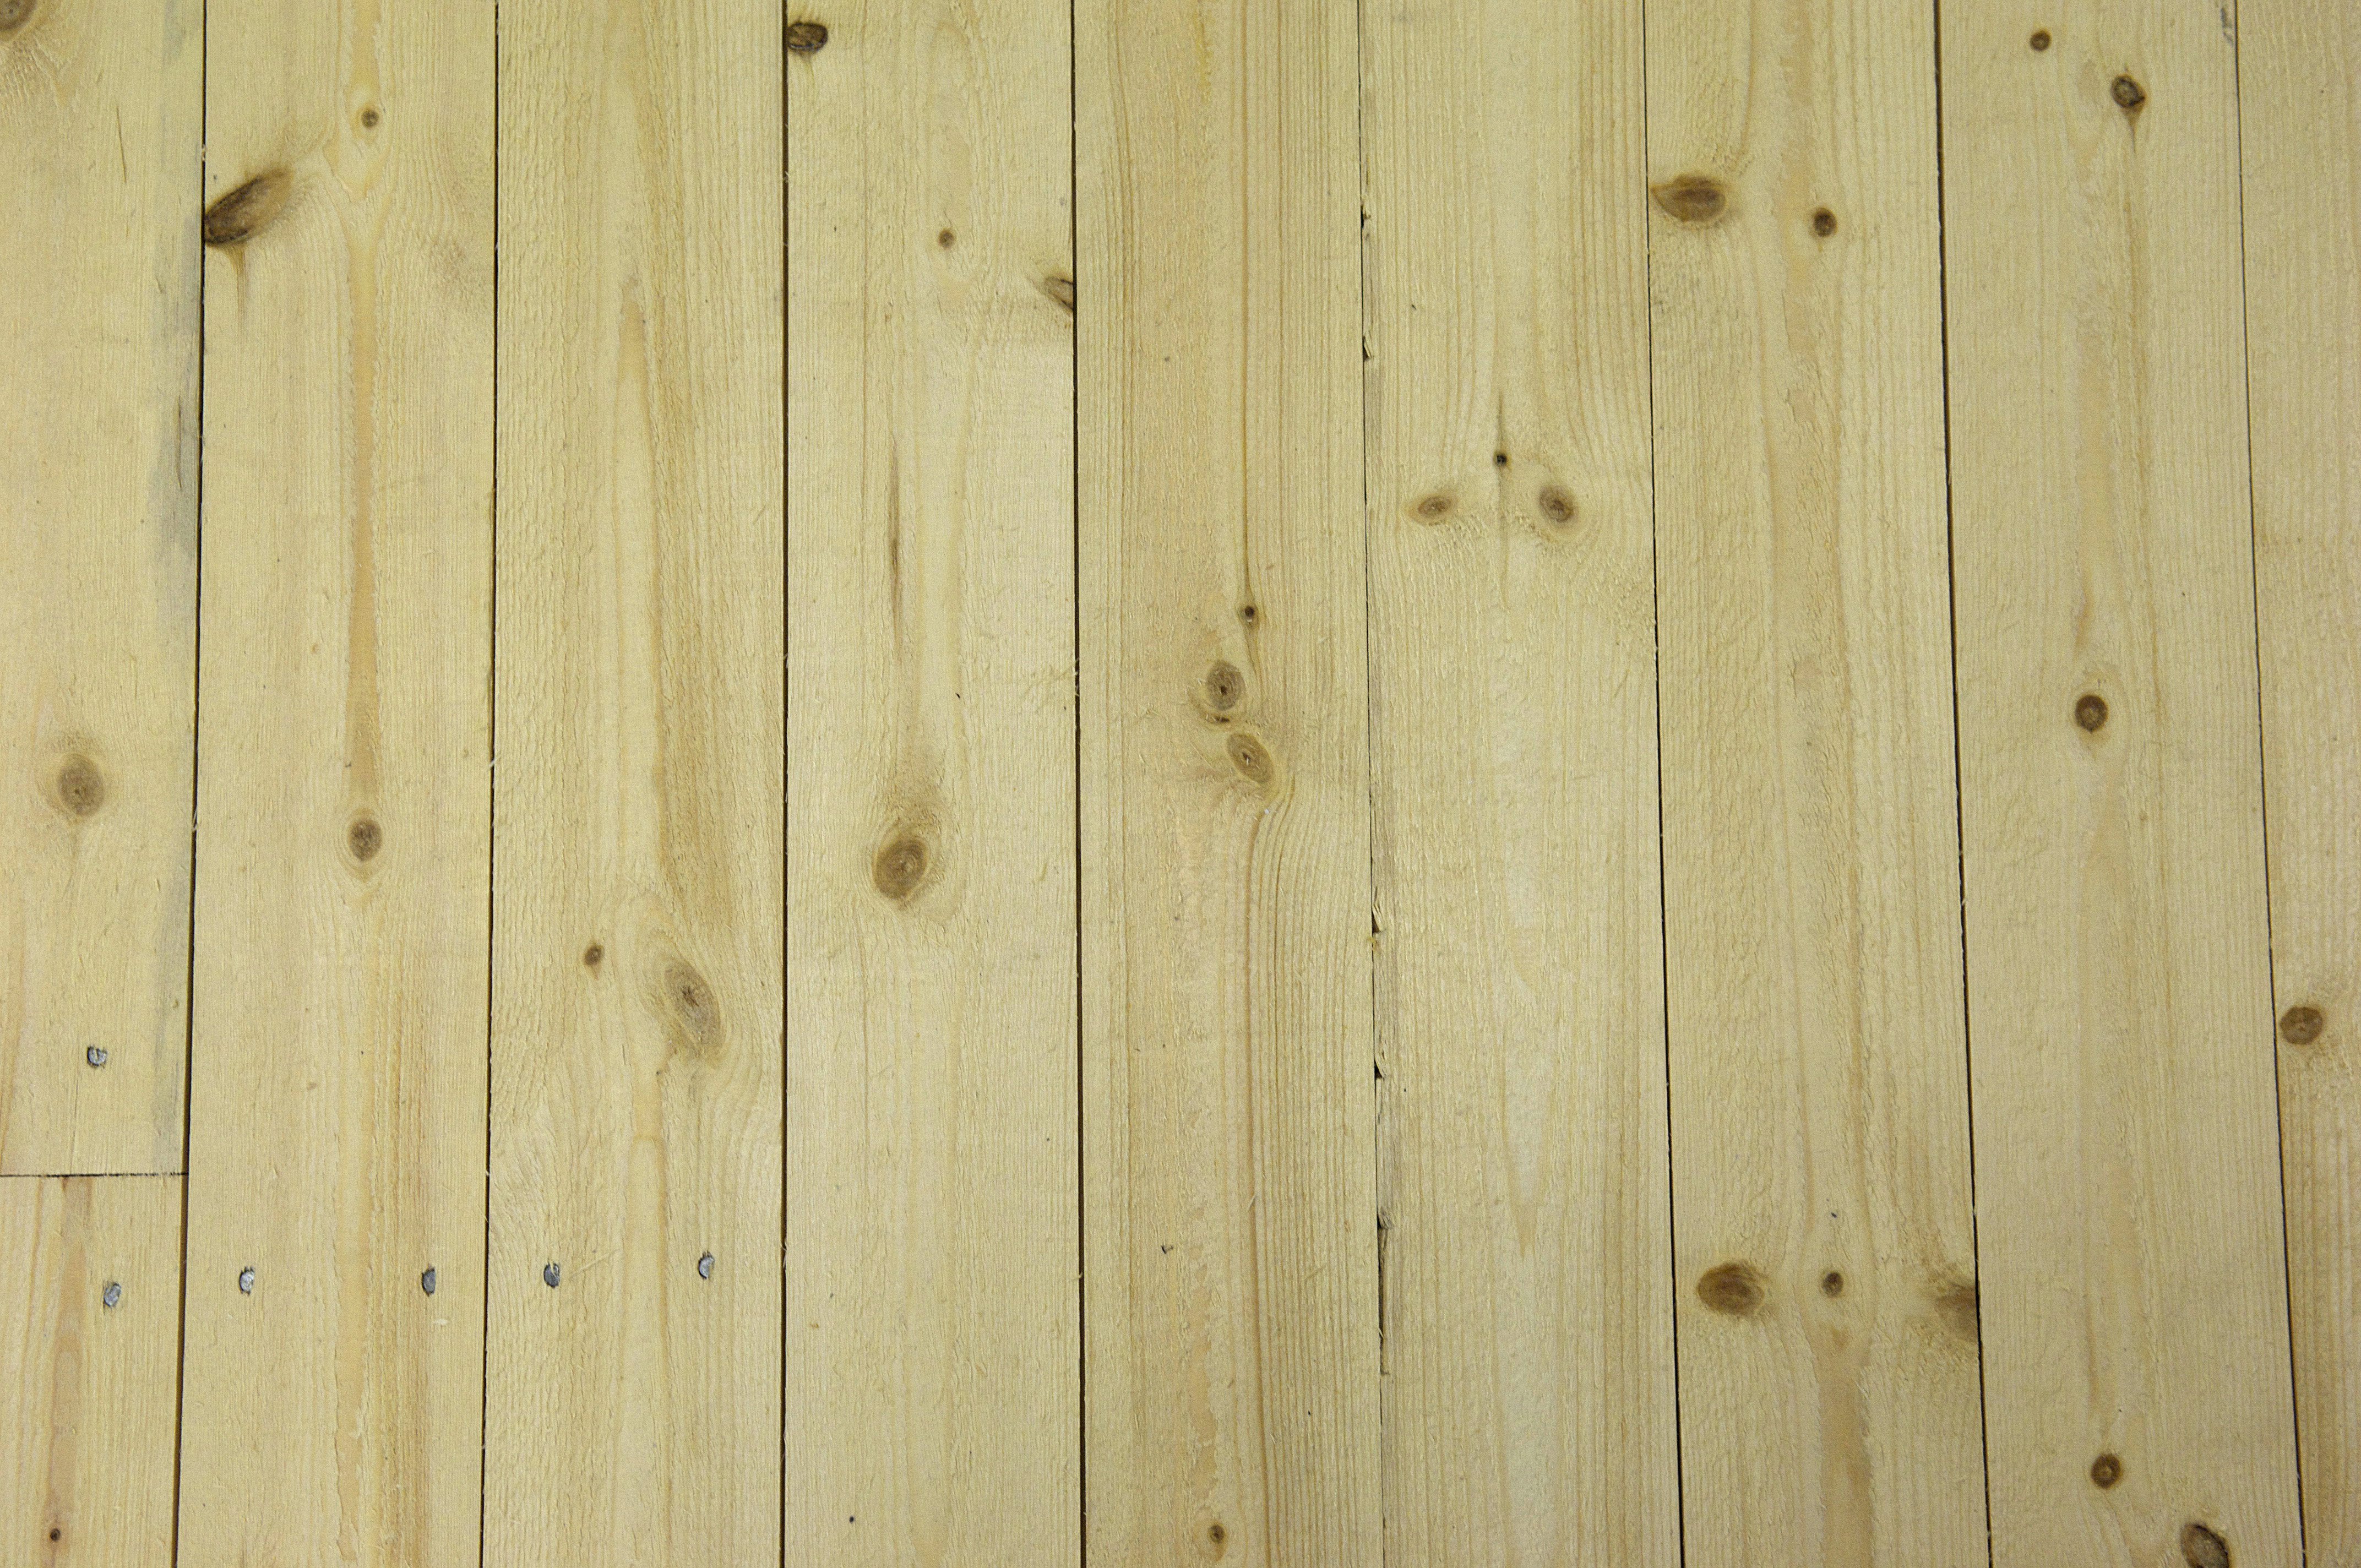 High res wood textures